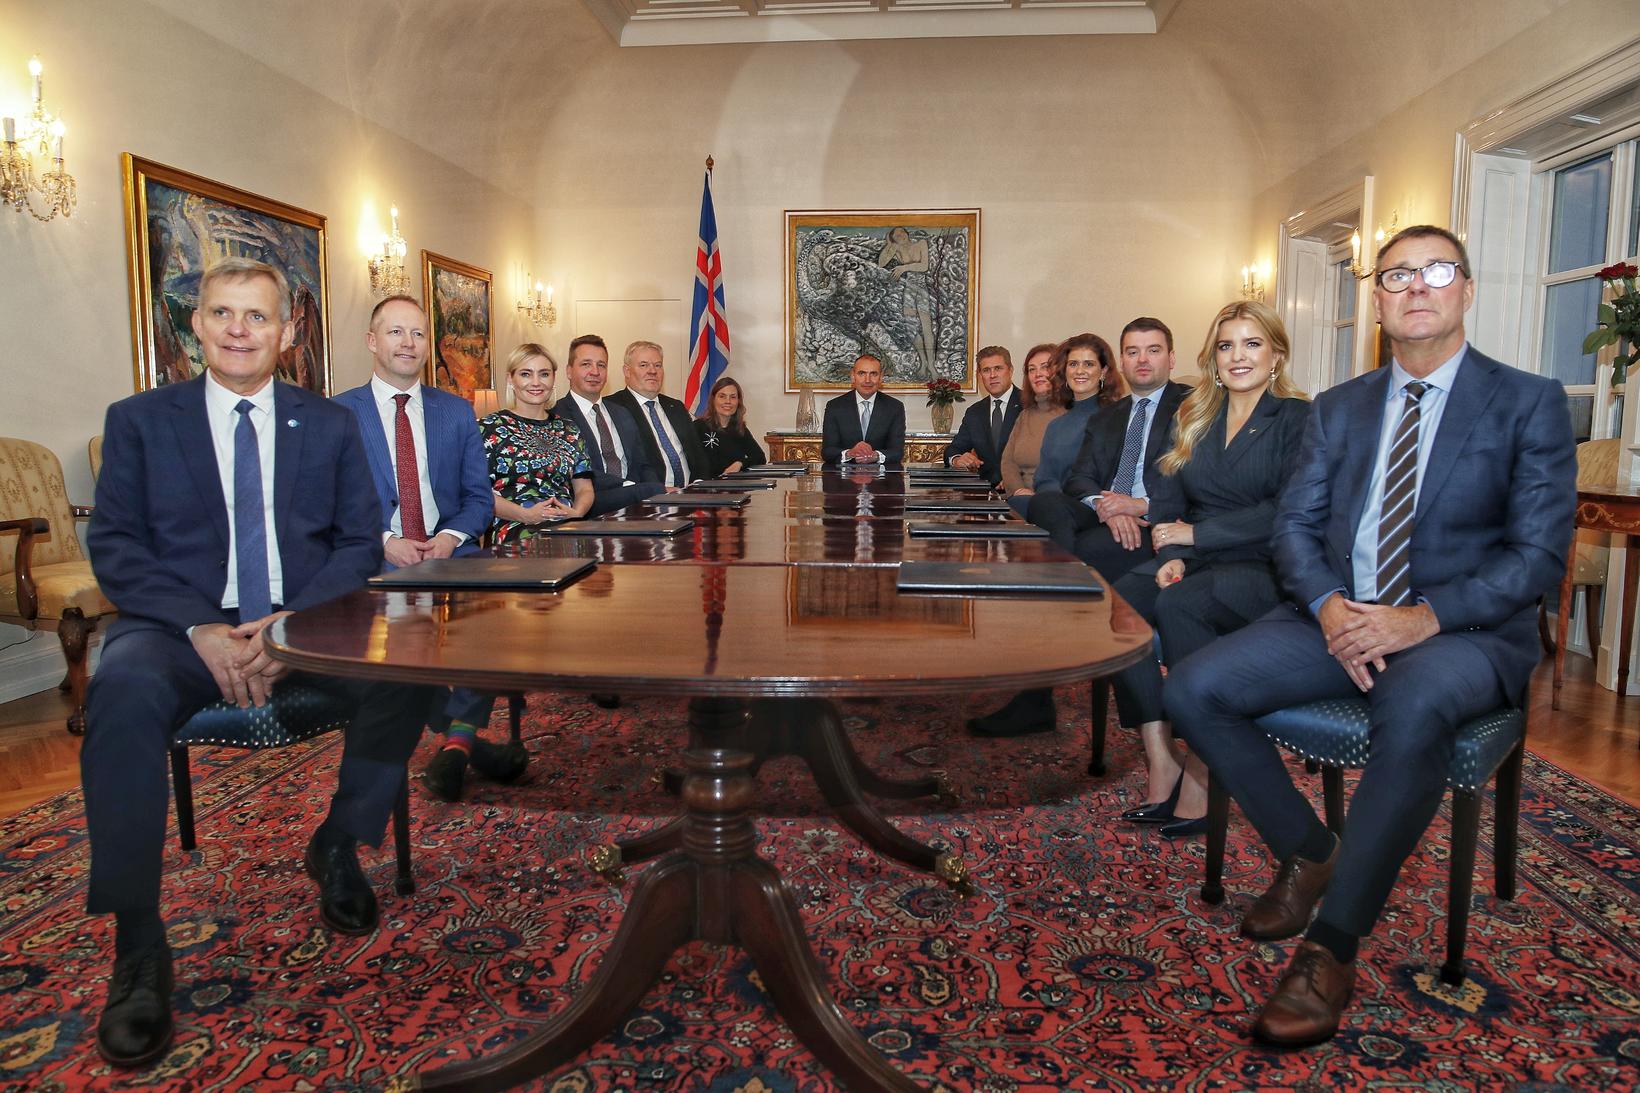 Members of the new government at Bessastaðir, the presidential residence, …